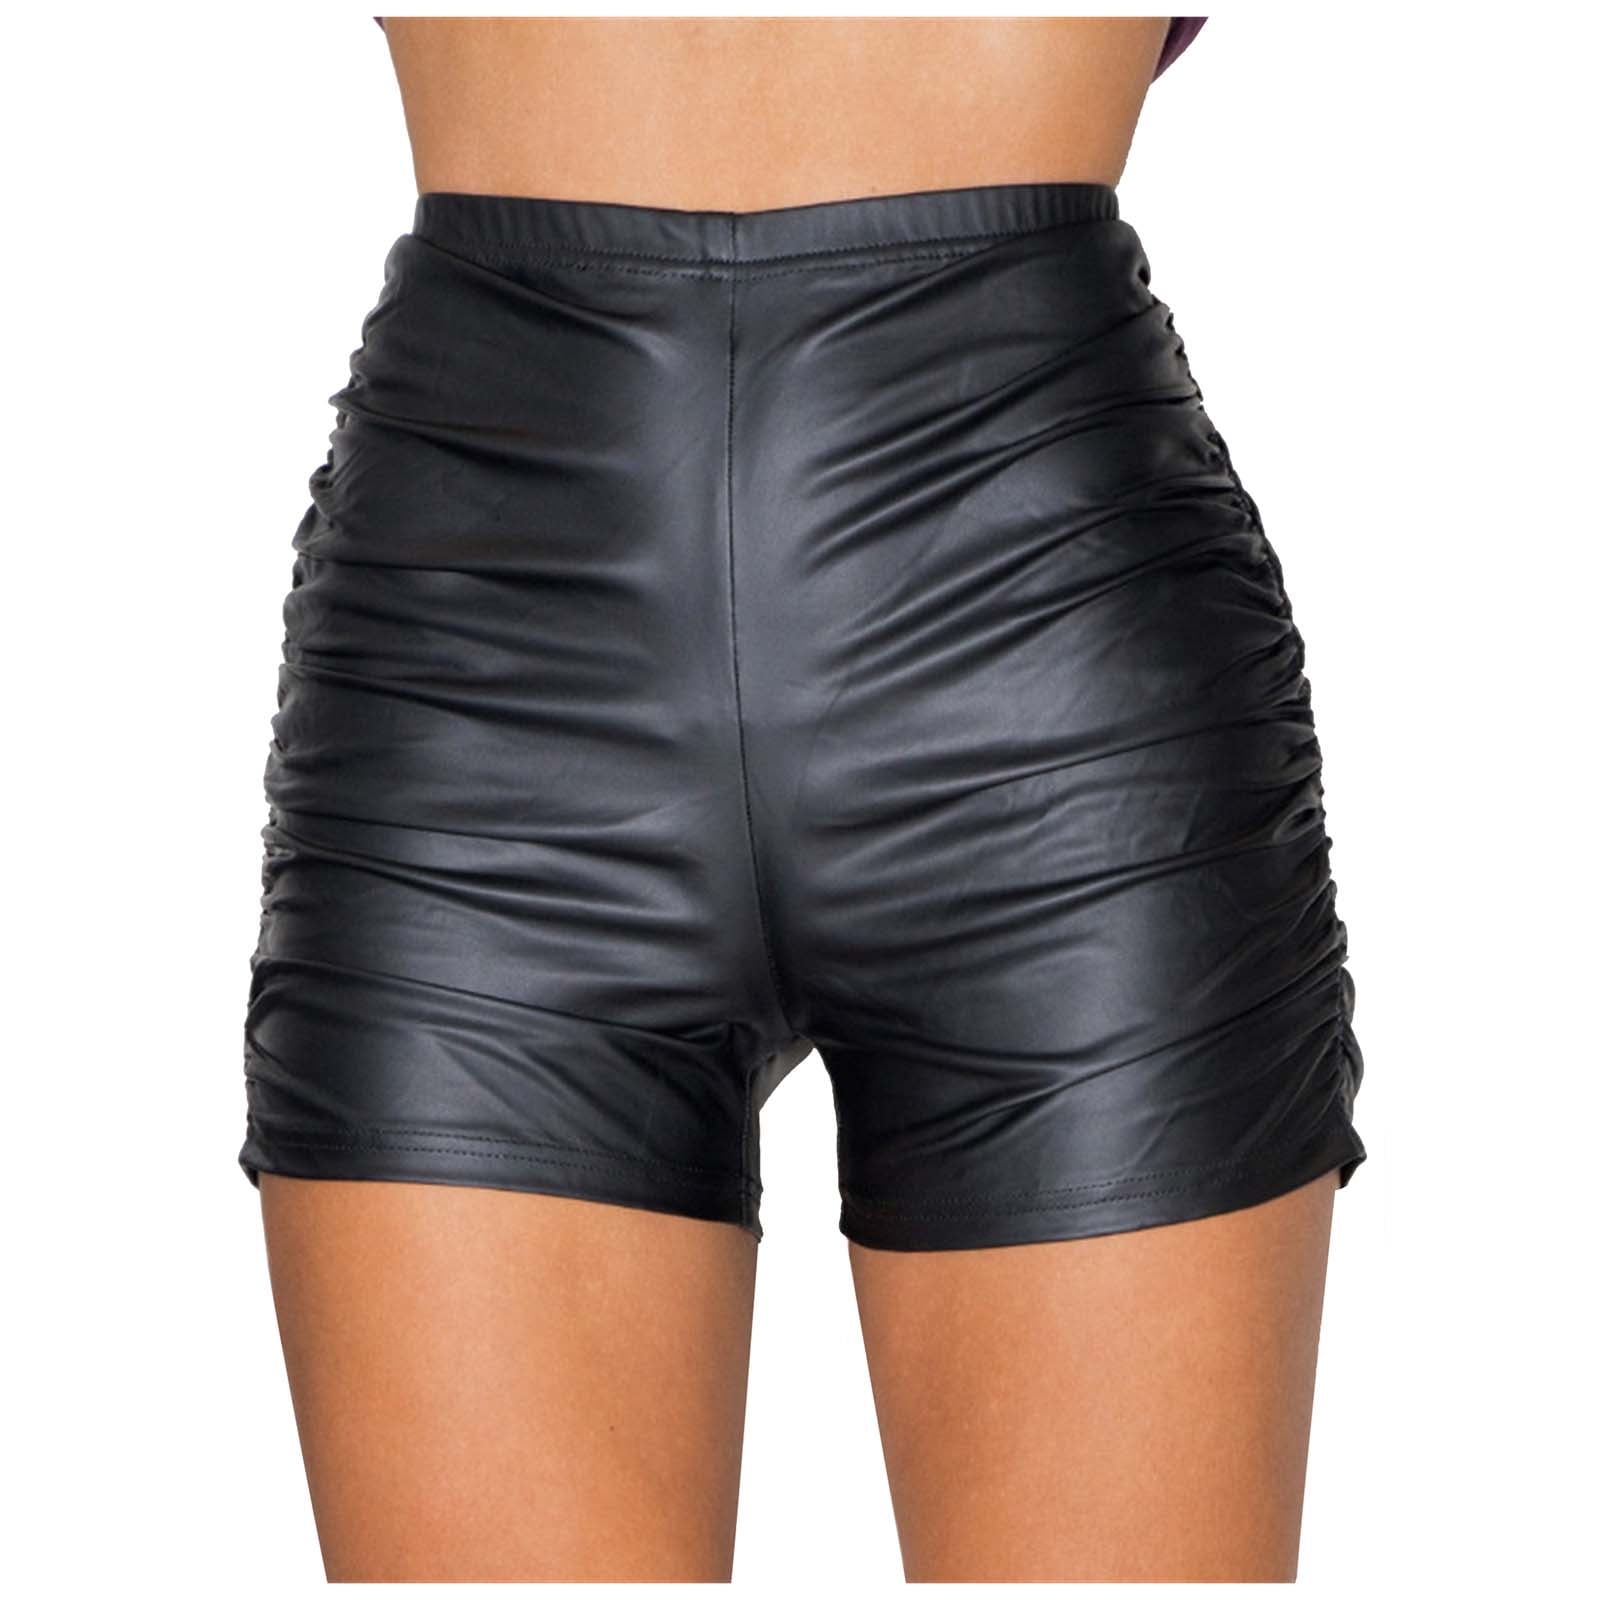 TiaoBug Women's Wet Look Faux Leather Back Ruffled Pants Booty Shorts Hot  Dance Bottoms Underpants